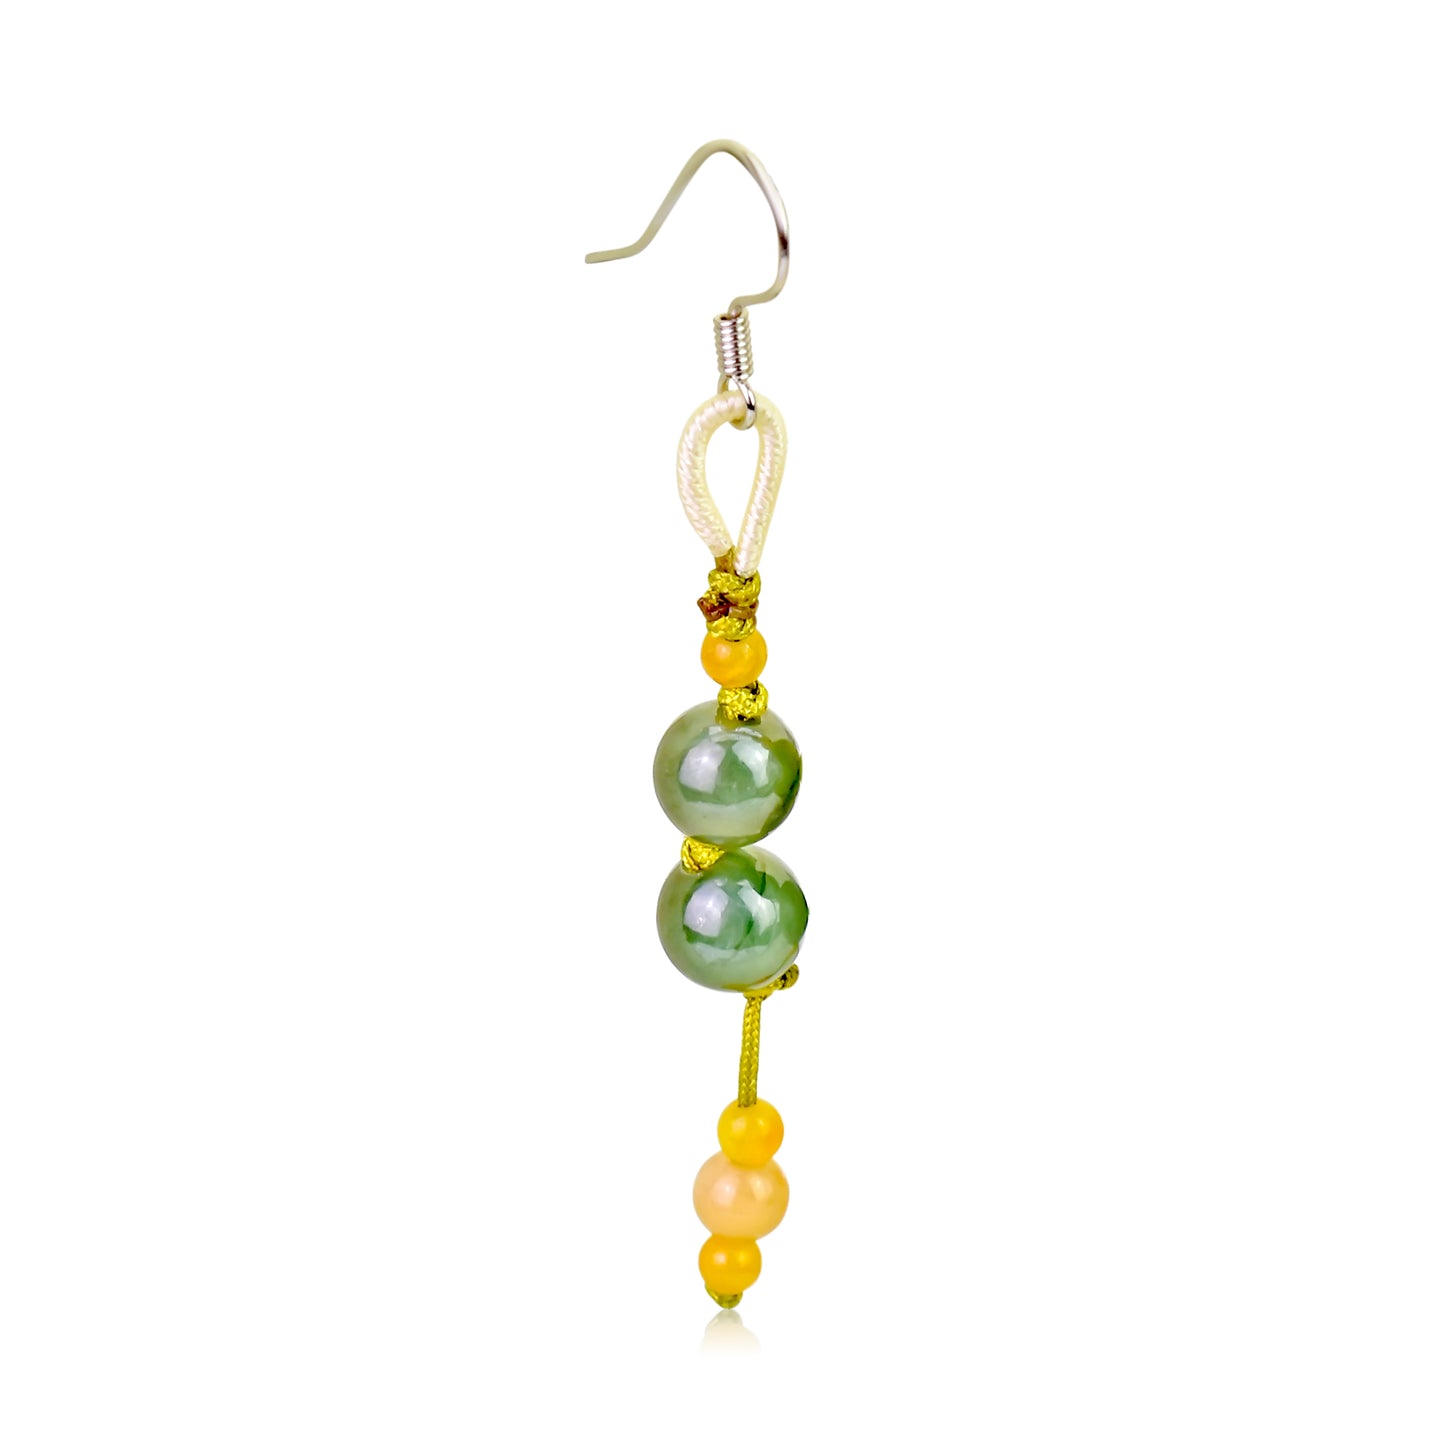 Make Every Look Unique with Eye-Catching Vibrant Jade Beads Earrings made with Yellow Cord